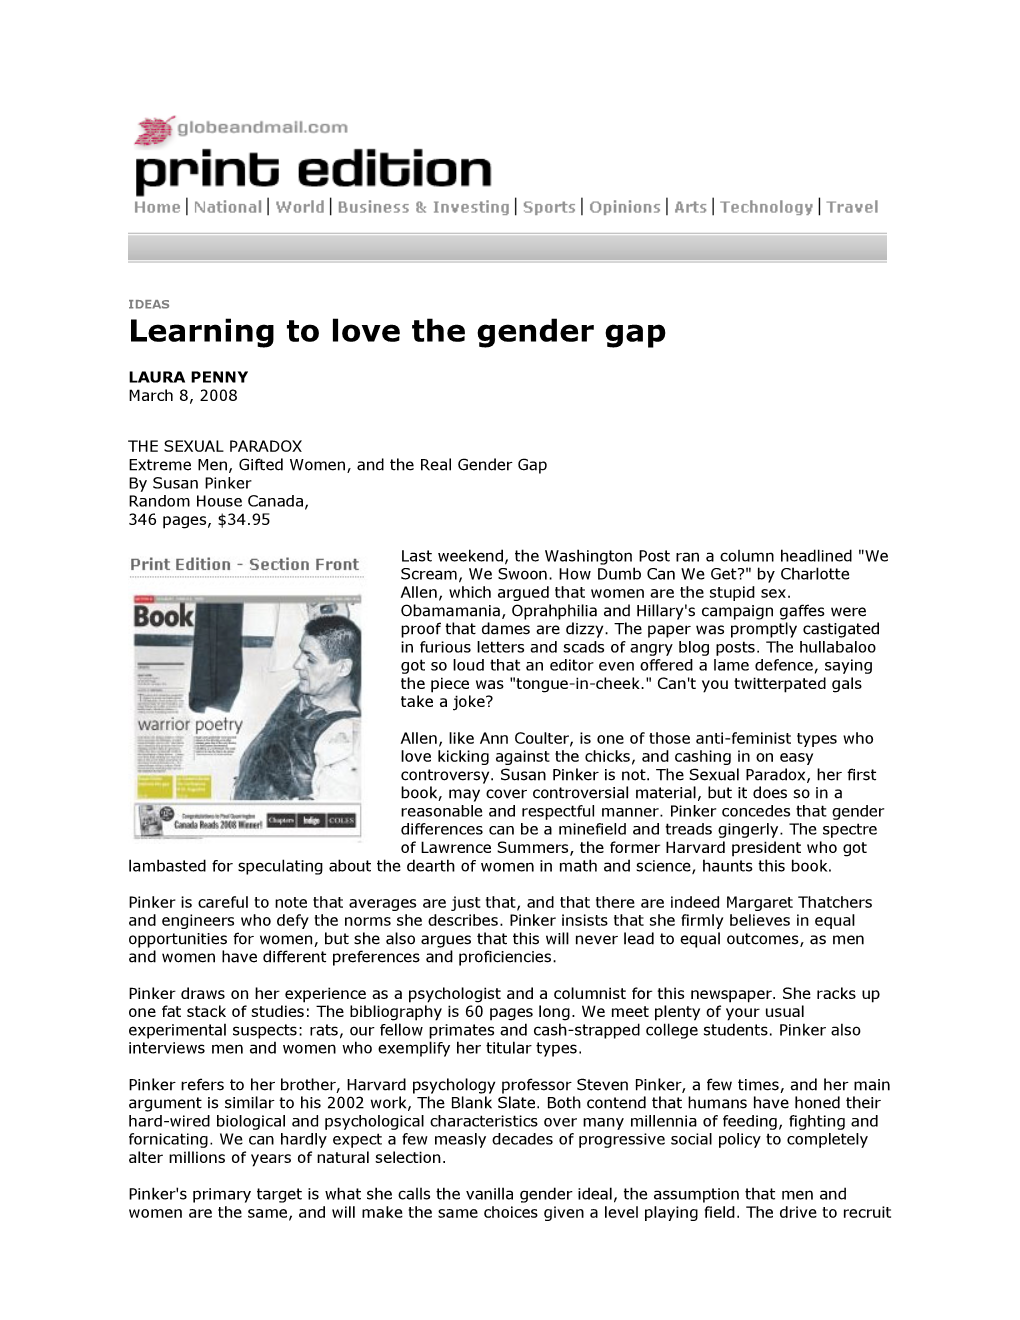 Learning to Love the Gender Gap